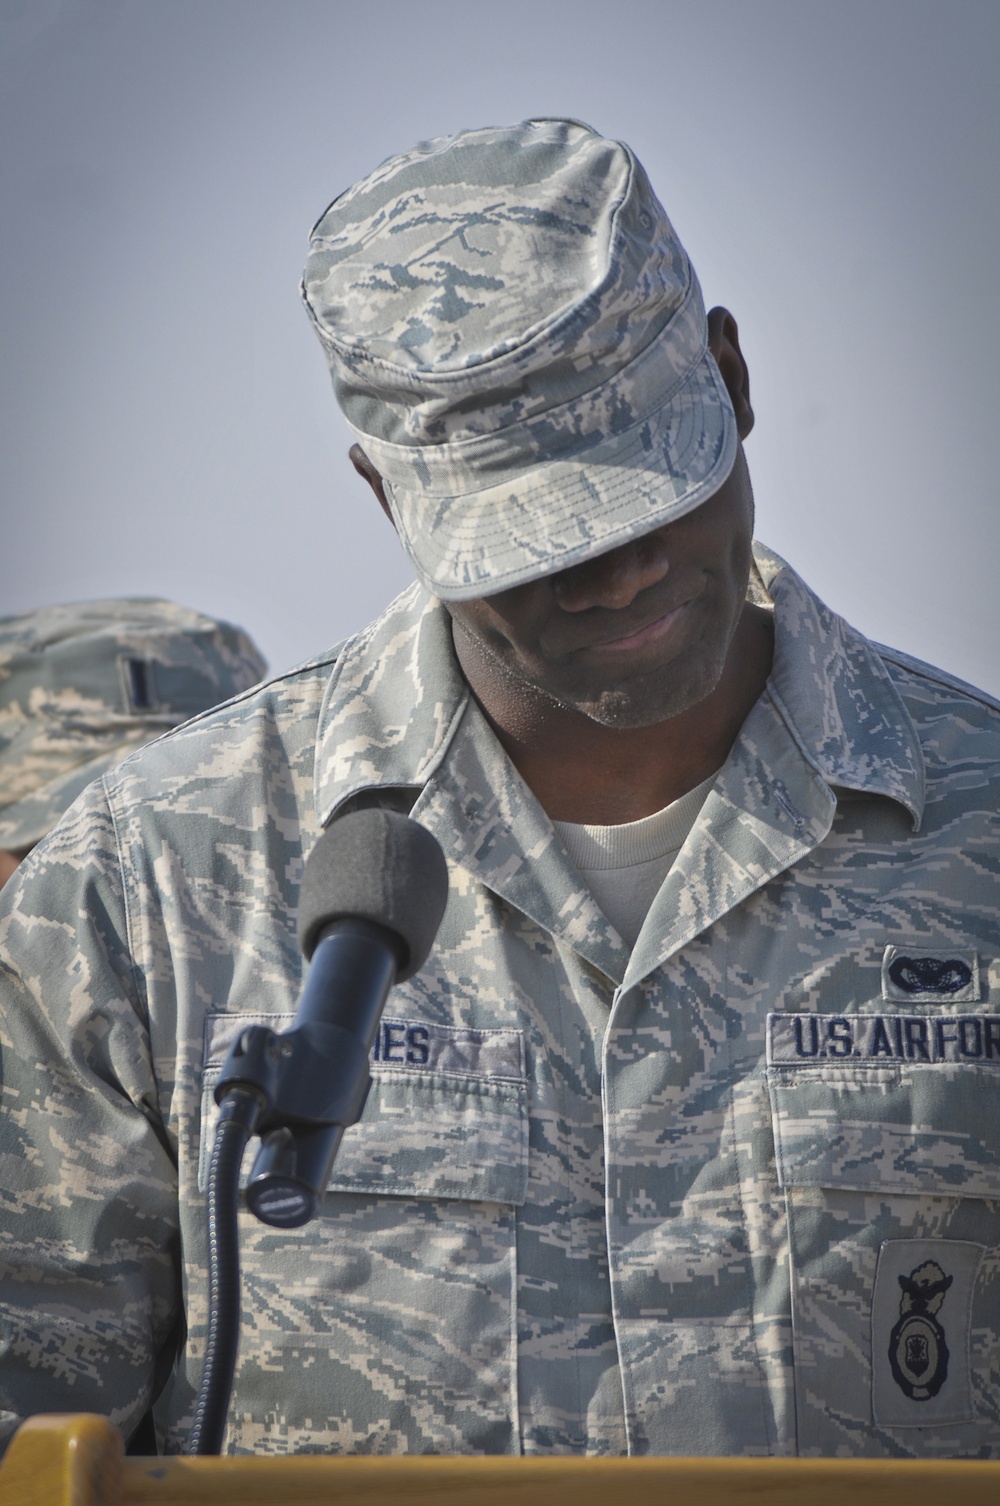 9/11 memorial ceremony at the 386th Air Expeditionary Wing